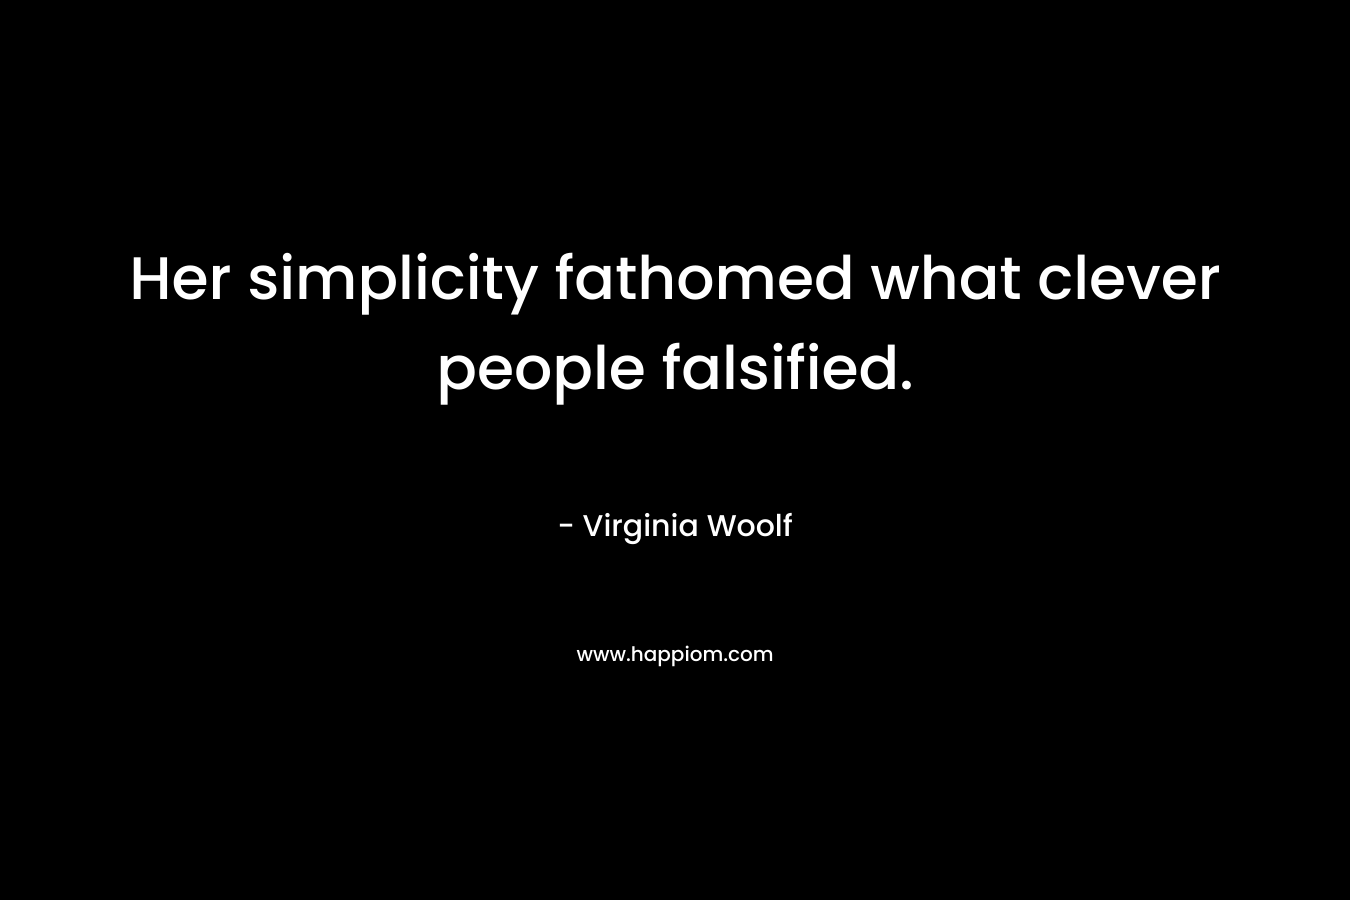 Her simplicity fathomed what clever people falsified.